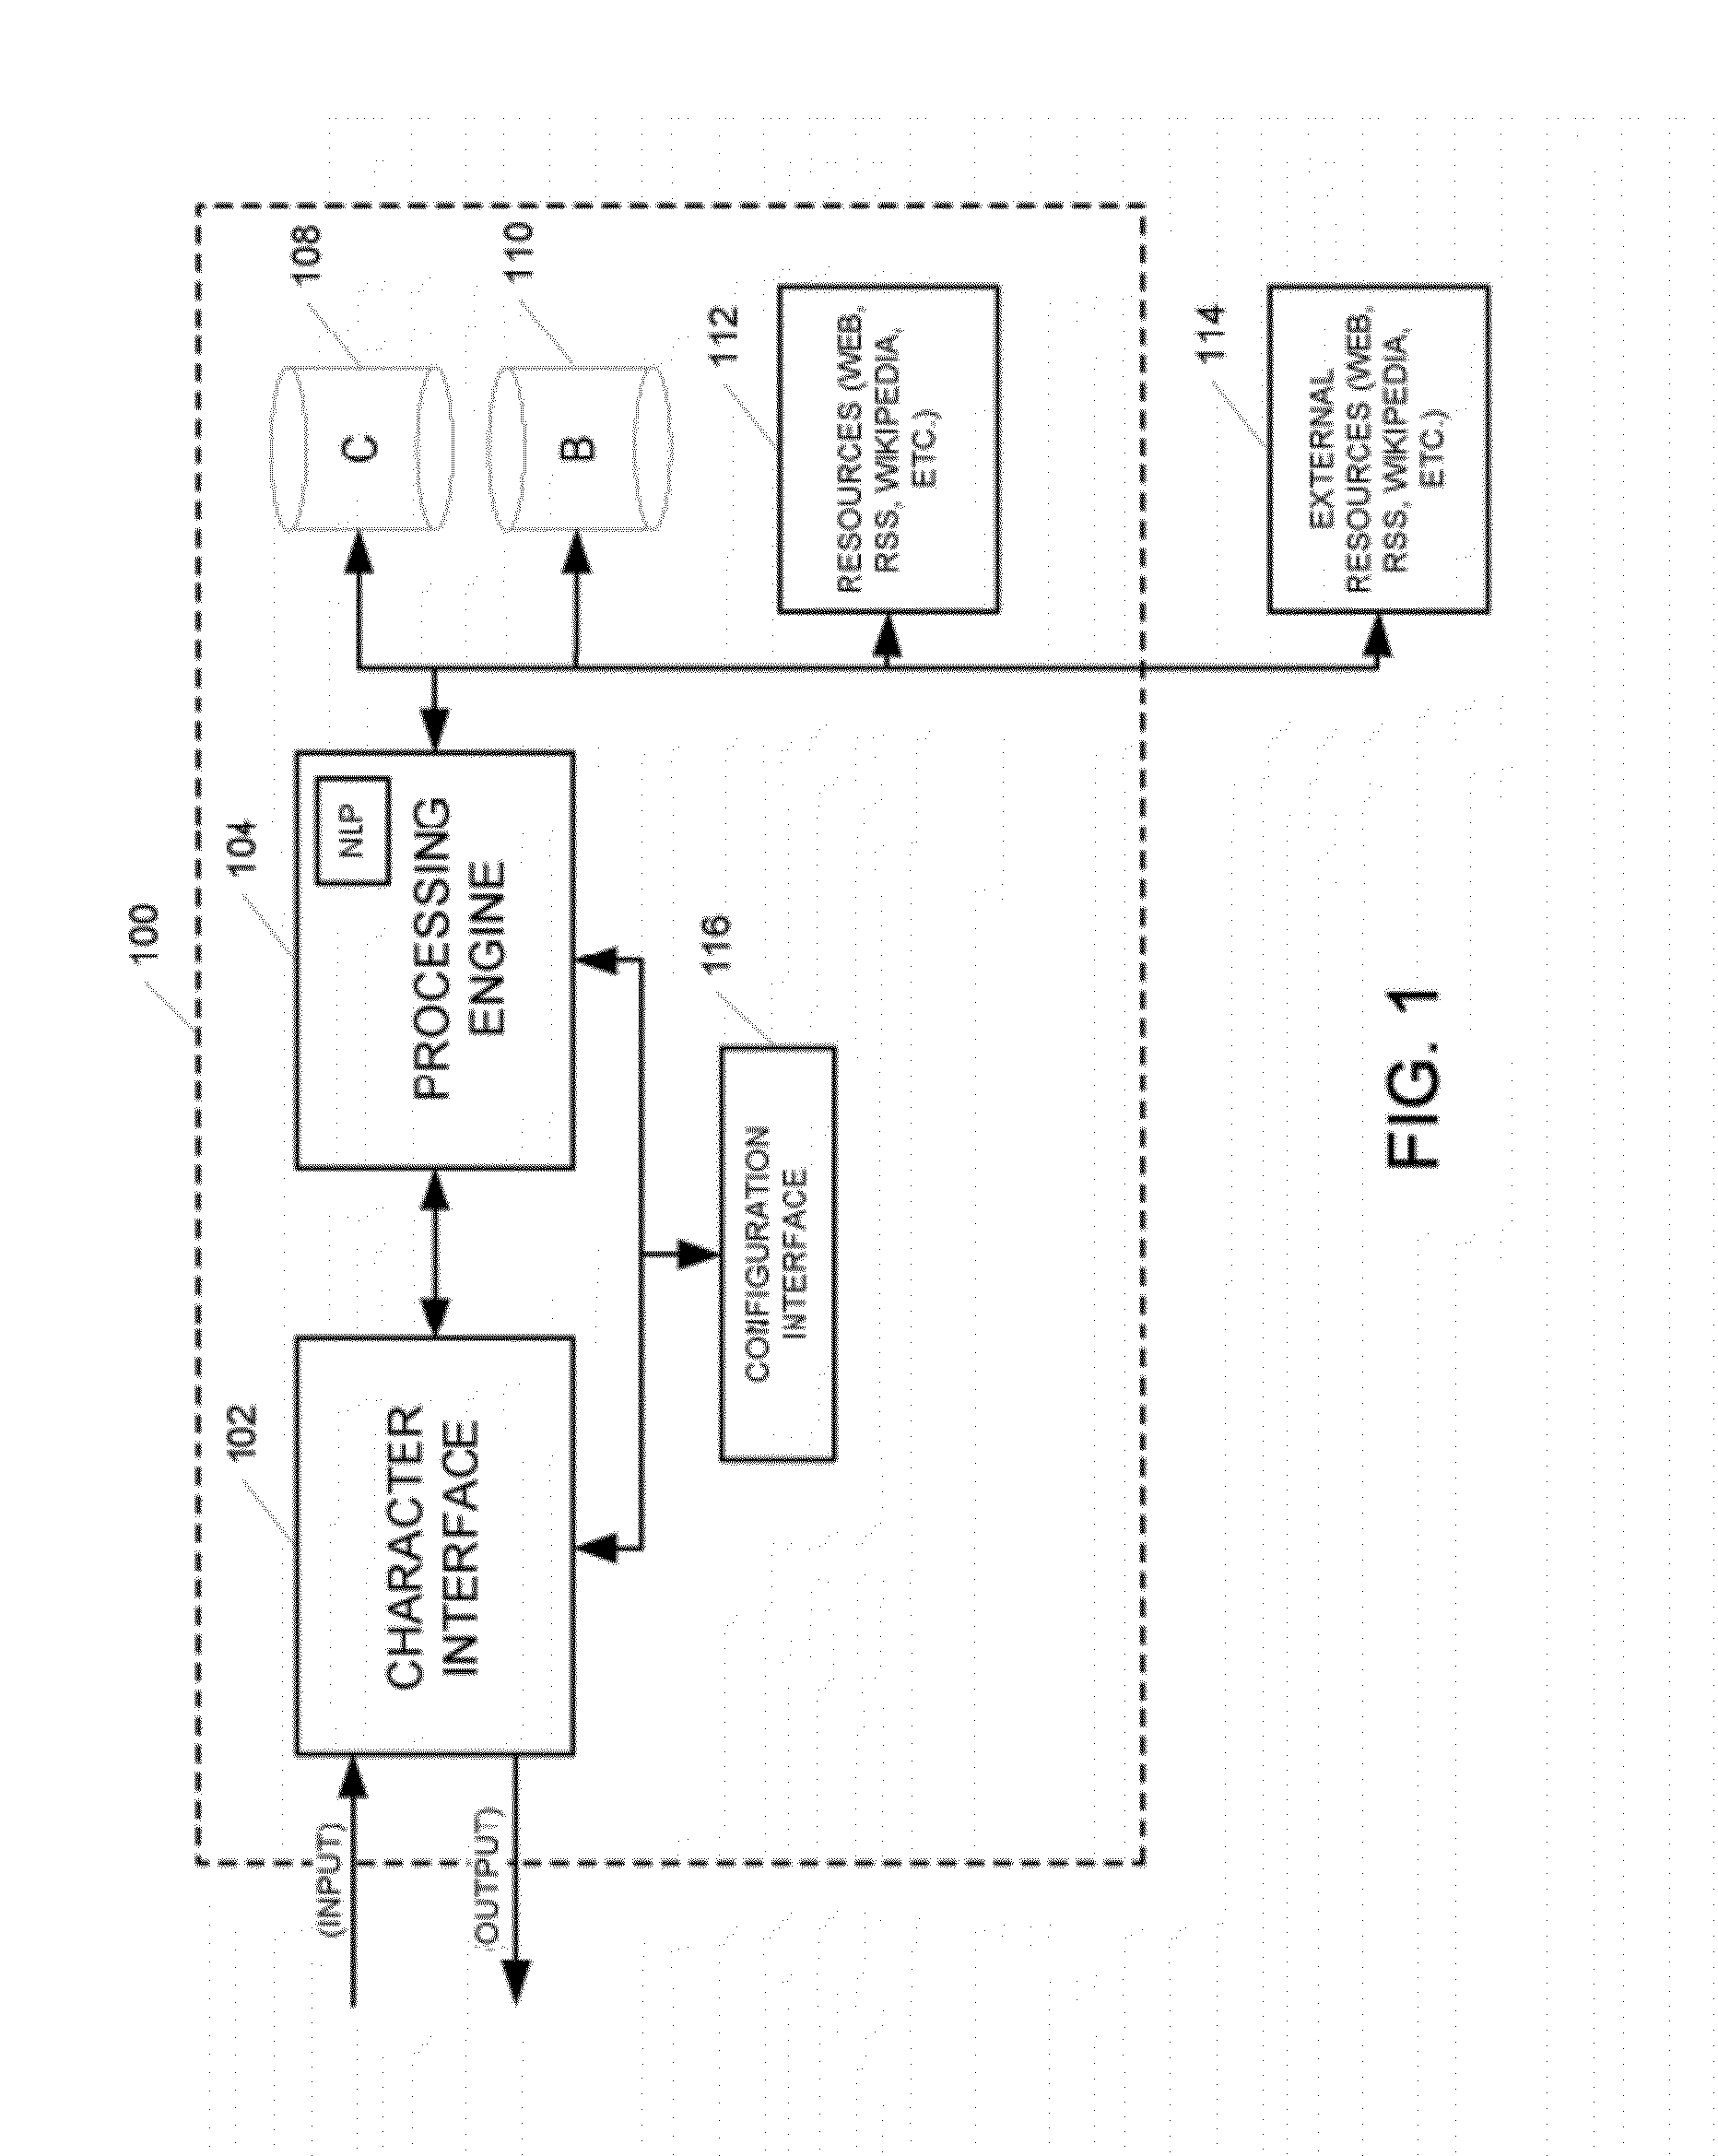 Systems and methods for generating and implementing an interactive man-machine web interface based on natural language processing and avatar virtual agent based character